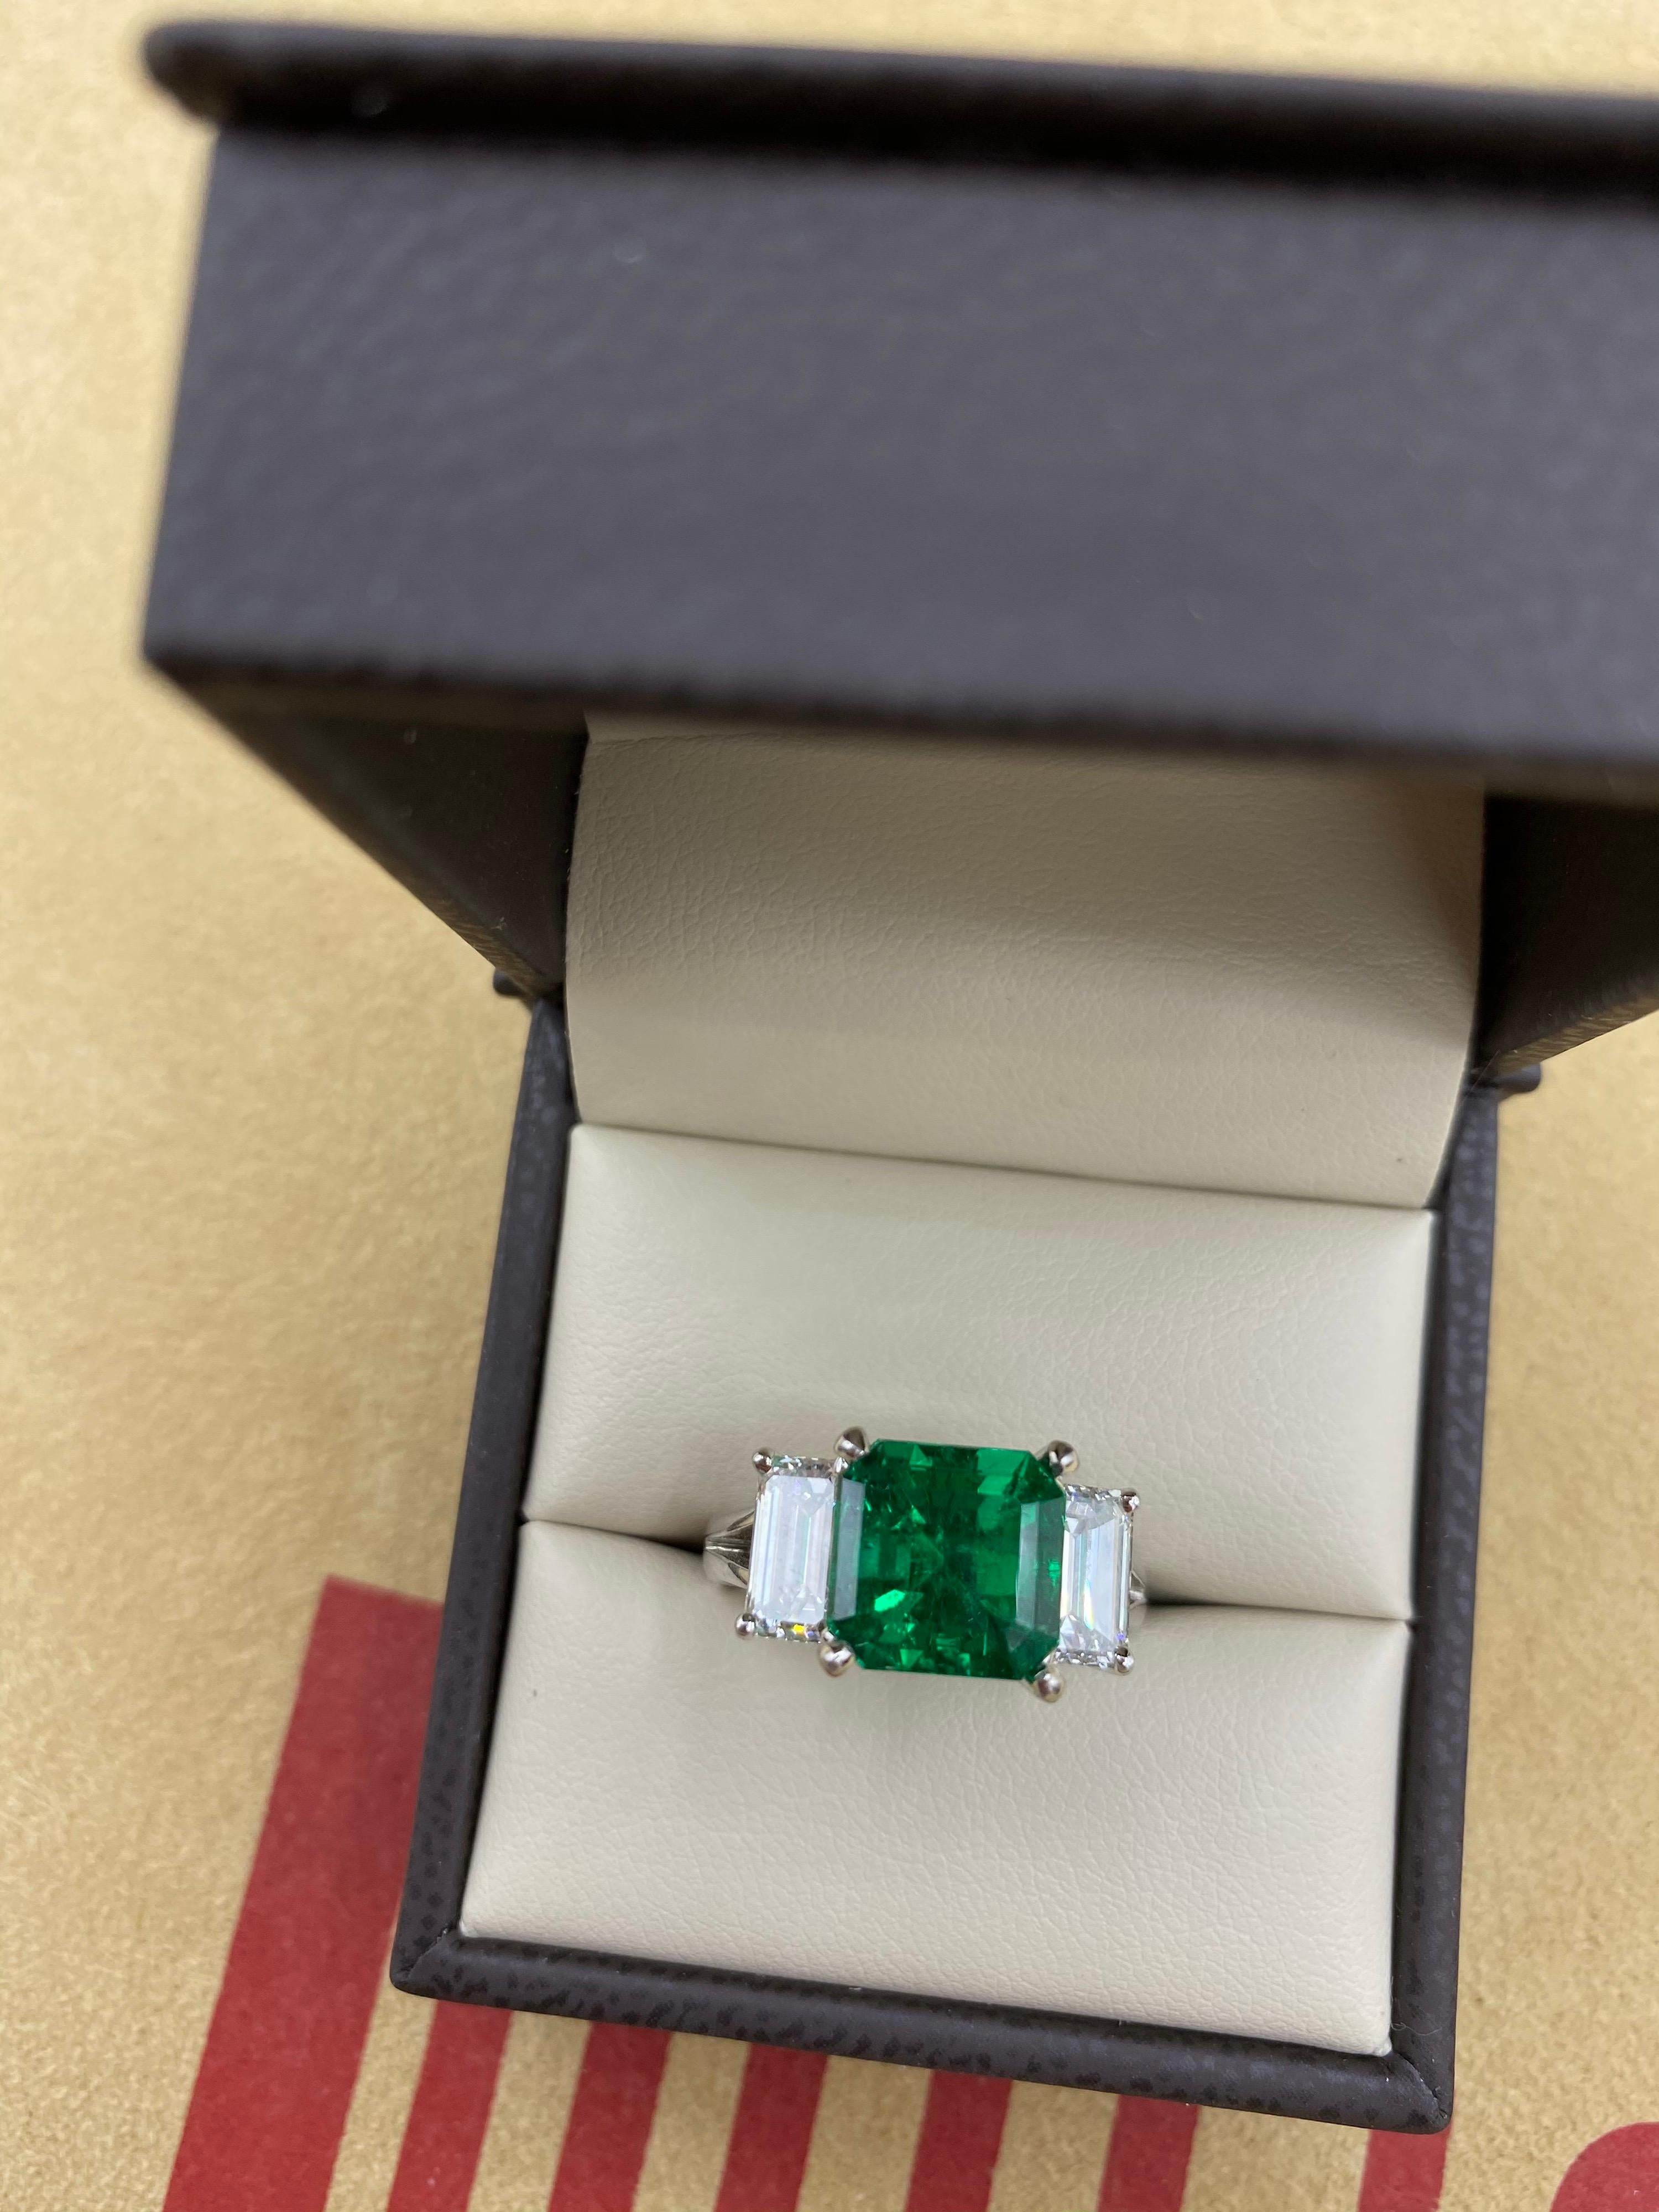 From the Emilio Jewelry Museum Vault, Showcasing a magnificent investment grade 3.90ct Gubelin certified no oil/untreated Colombian emerald. The color is Vivid Green which is the best saturation, it’s a super clean stone with excellent crystal. 
The